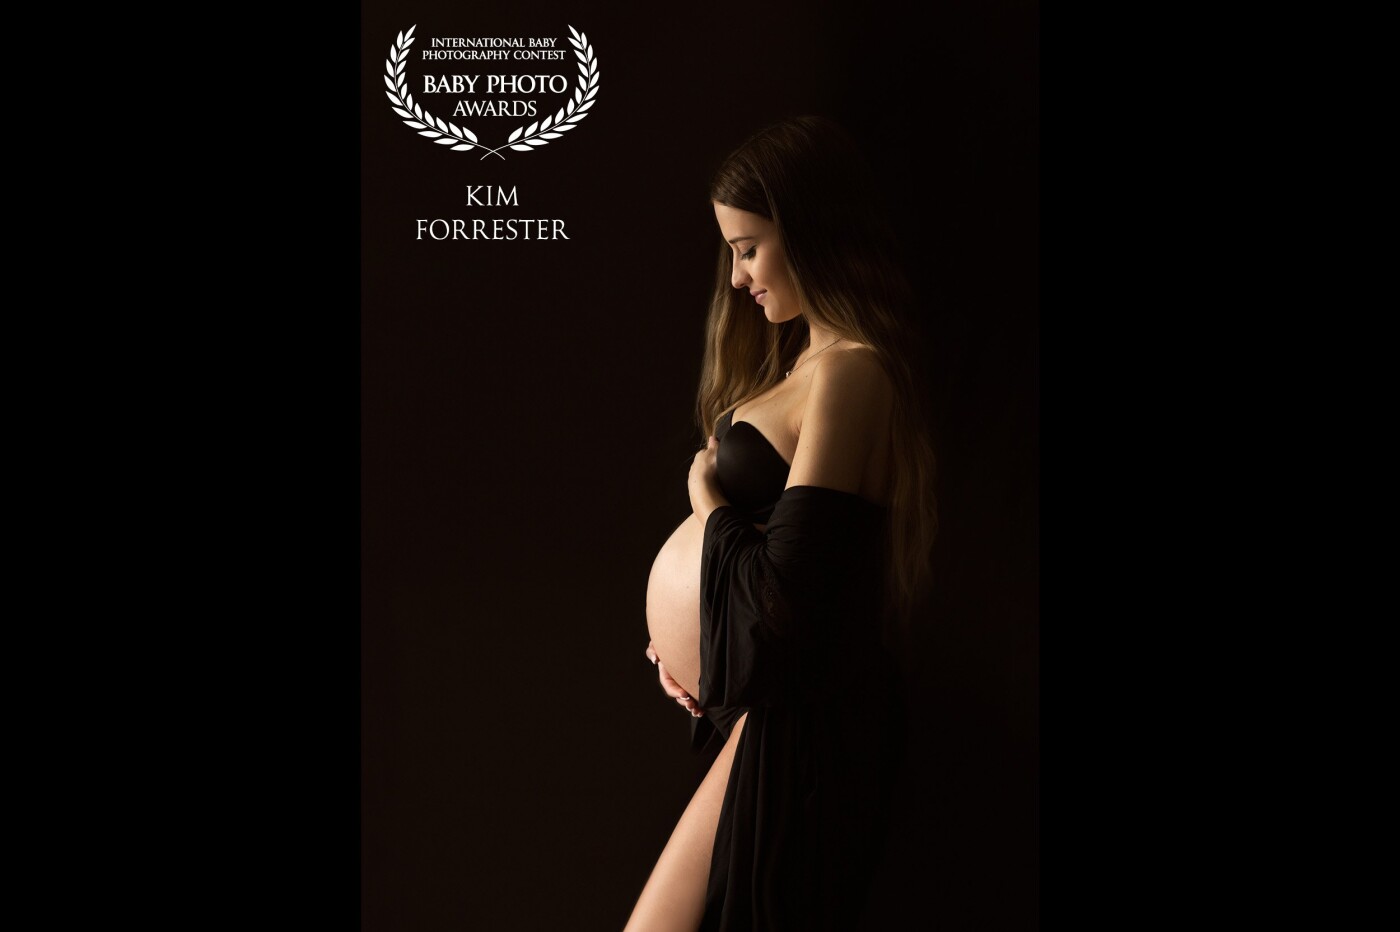 We get so wrapped up in preparing for a new baby that we often forget the transition a woman is going through, not just in creating the life inside her but in becoming a mother. I wanted to use light against a black scene to eliminate all distractions, and to highlight both the belly and the beauty of this mama-in-the-making.